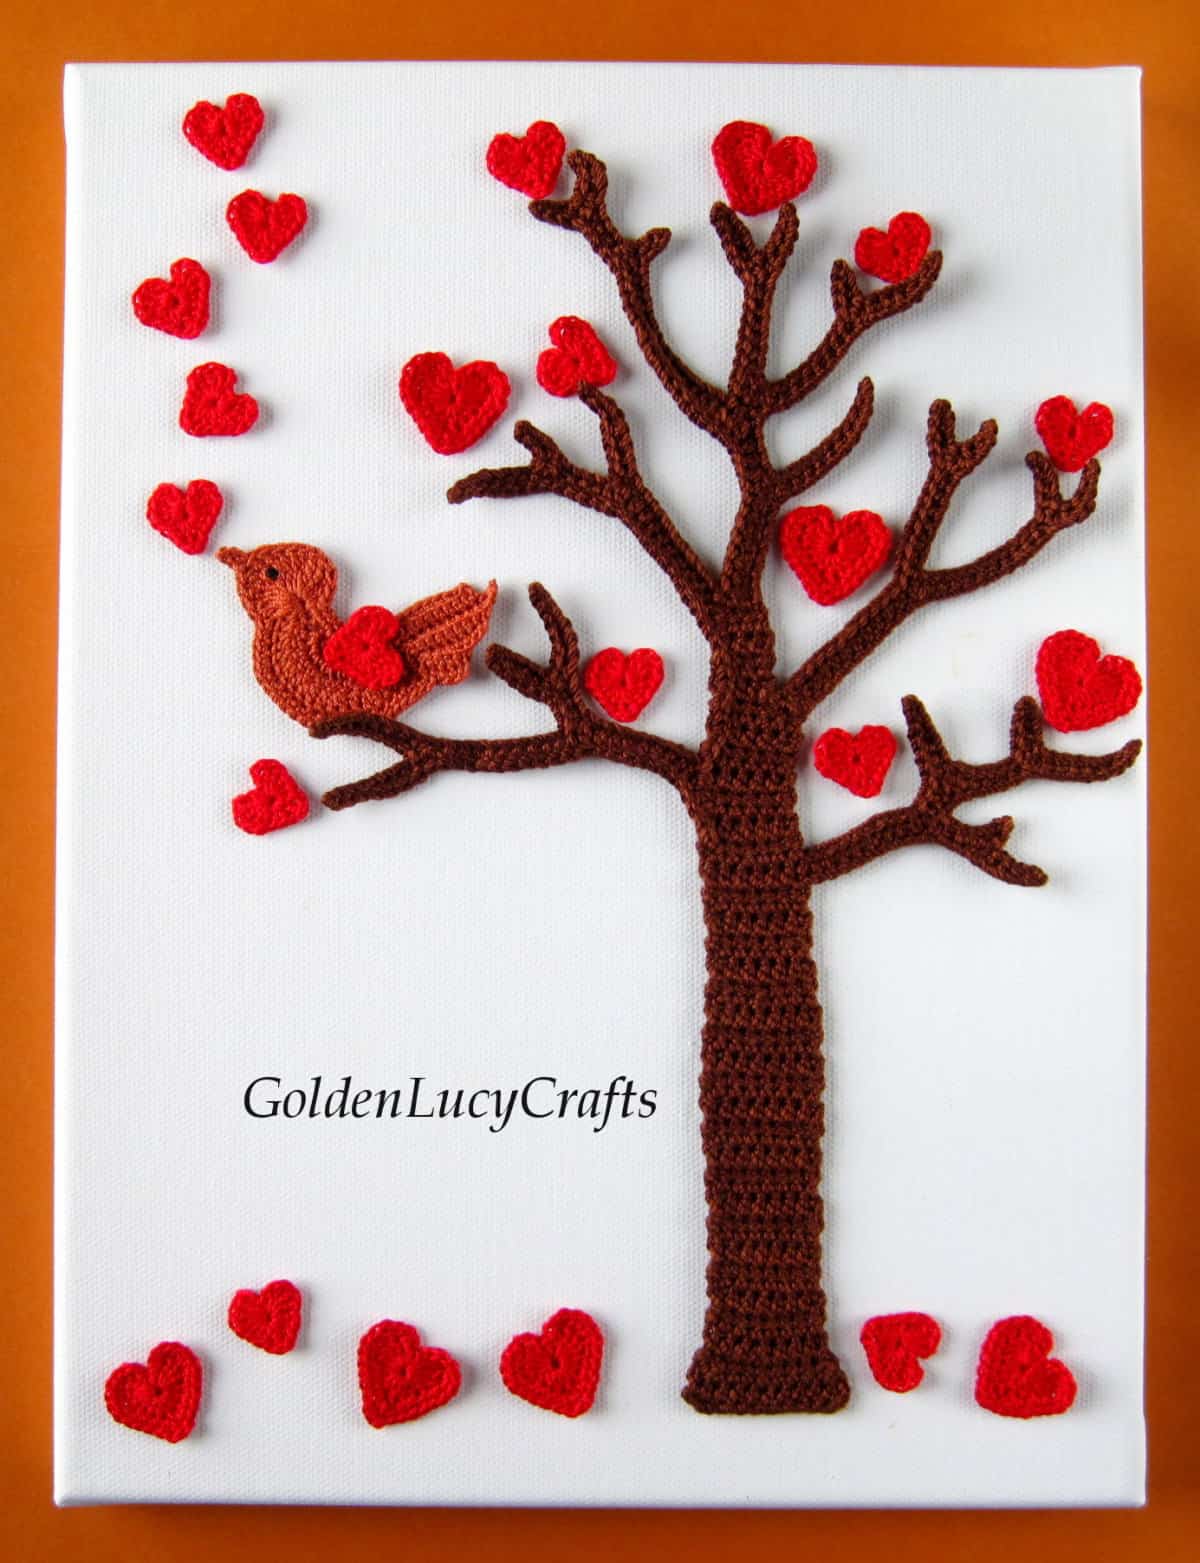 Crocheted applique tree with hearts and bird on it.